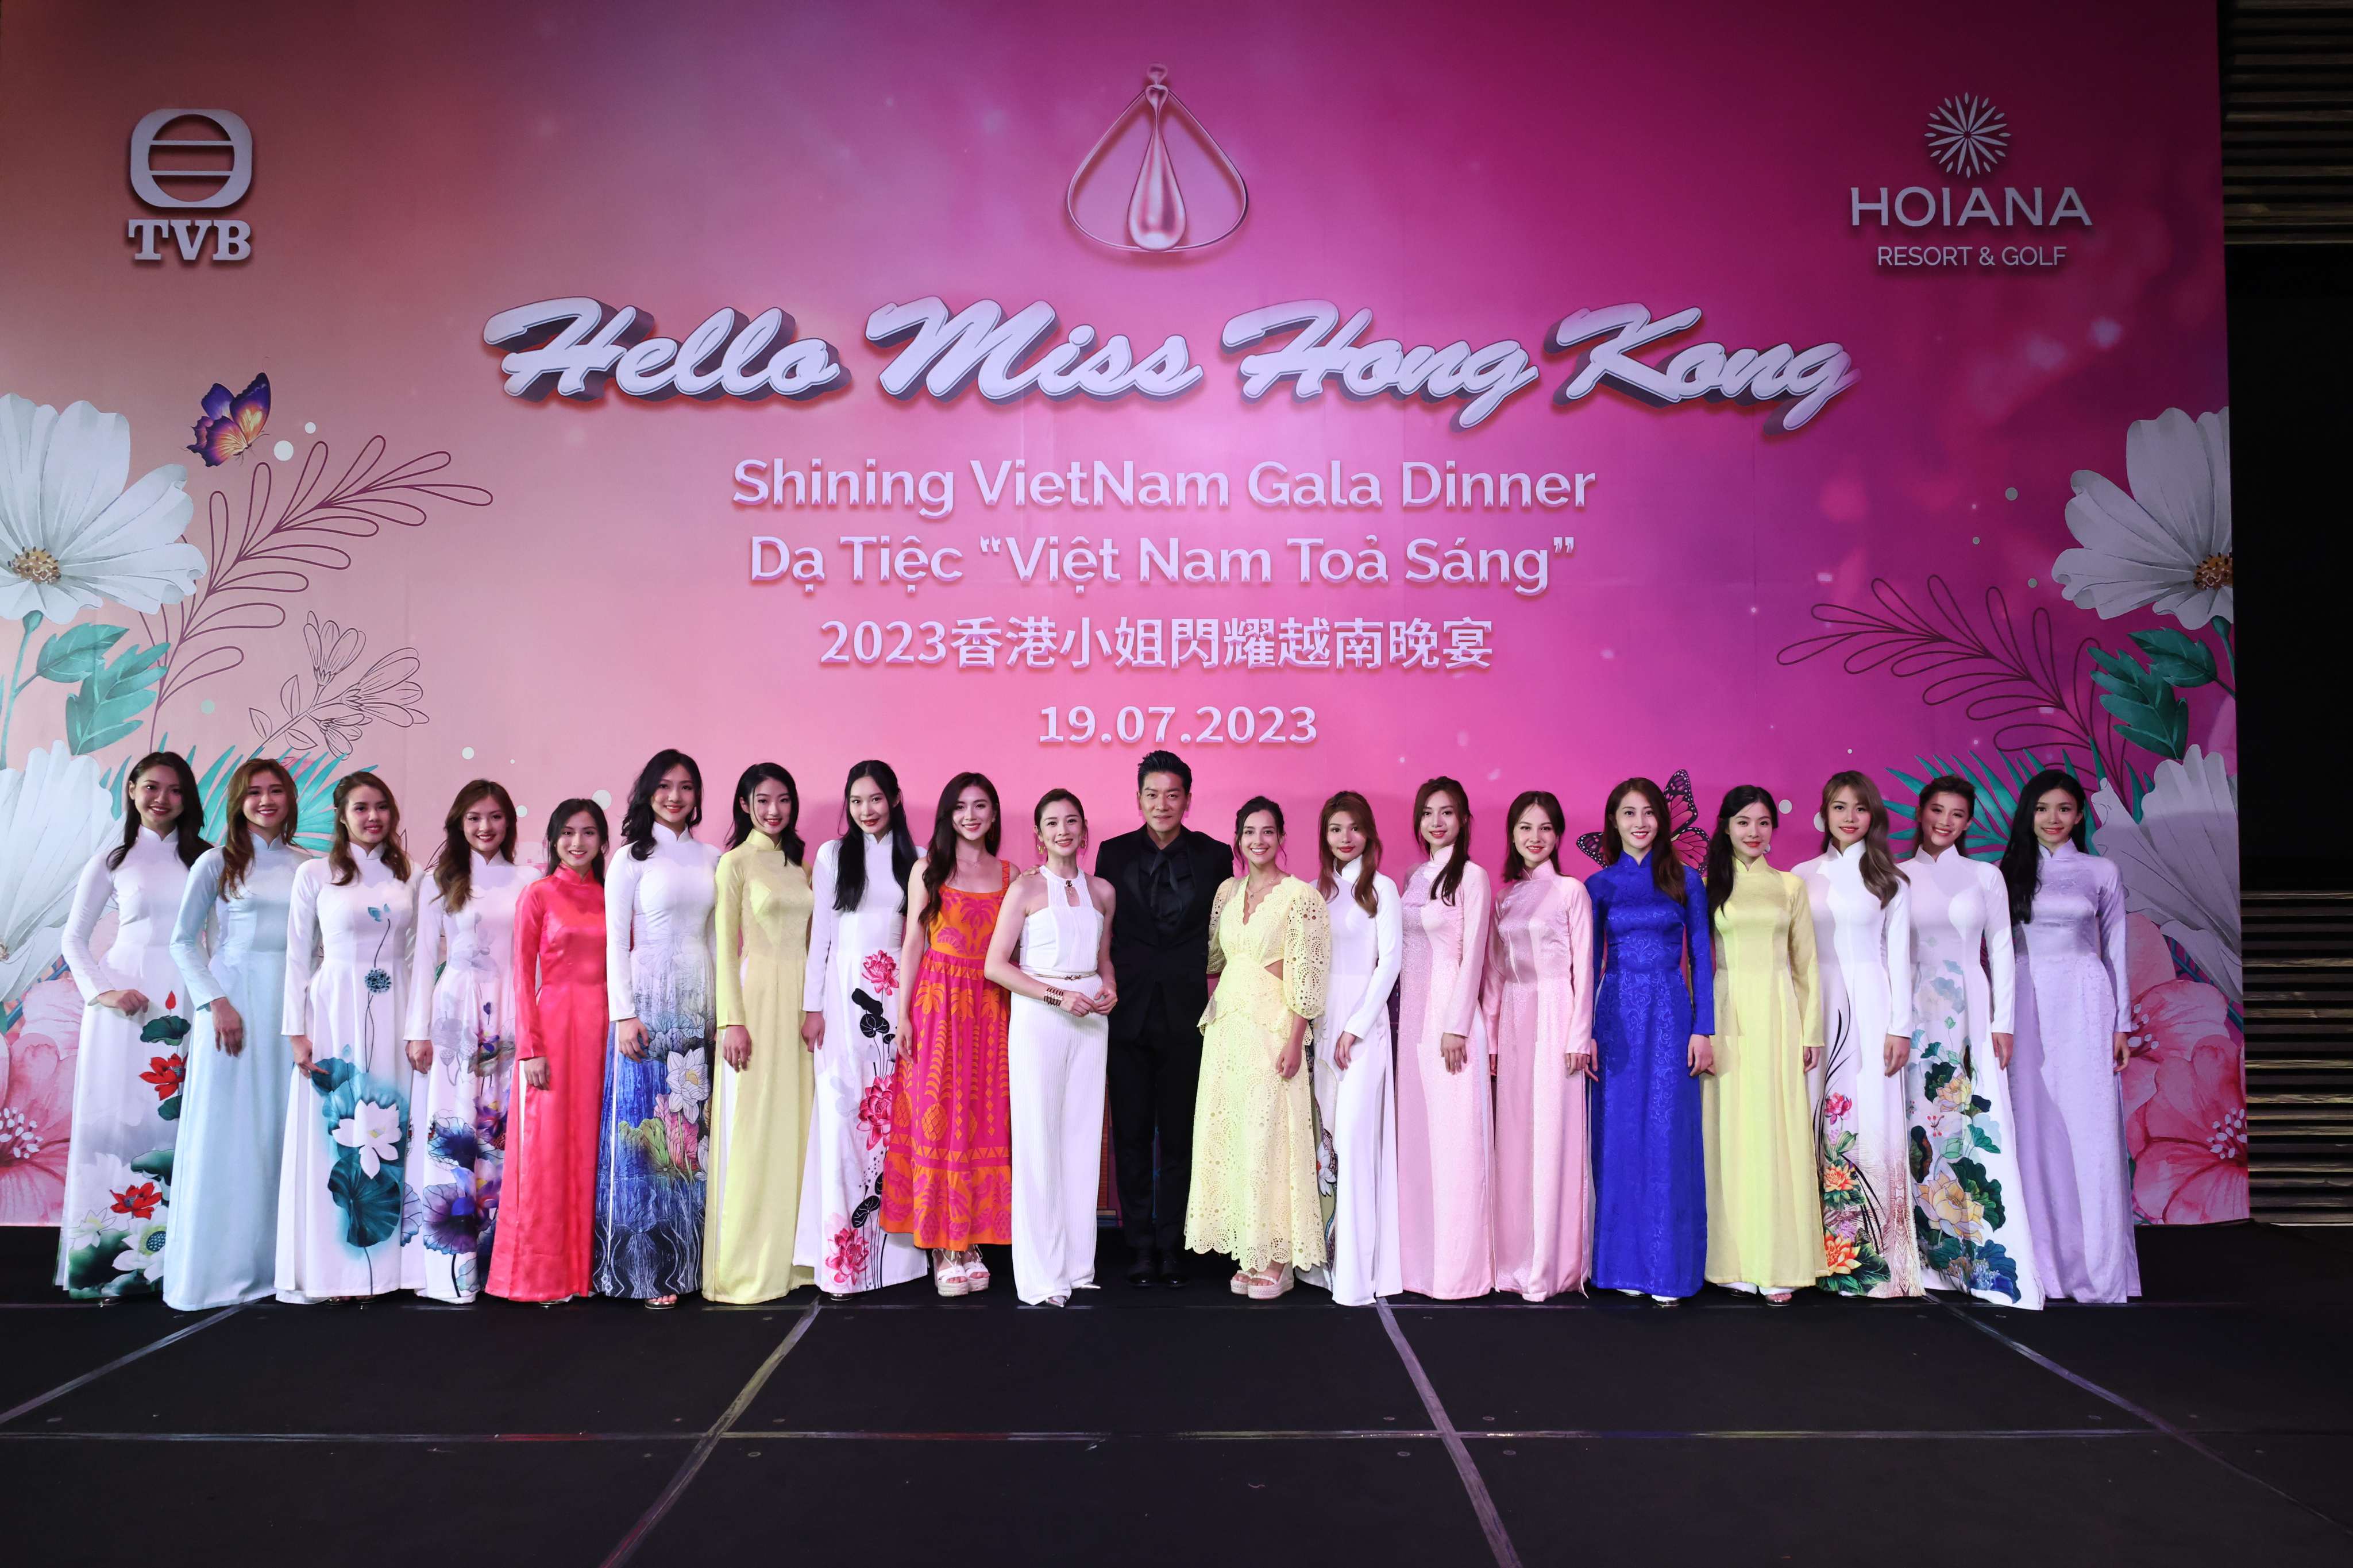 Miss Hong Kong Crowned, and Hoiana Resort & Golf Celebrates Successful Collaboration in Showcasing the Beauty and Culture of Central Vietnam